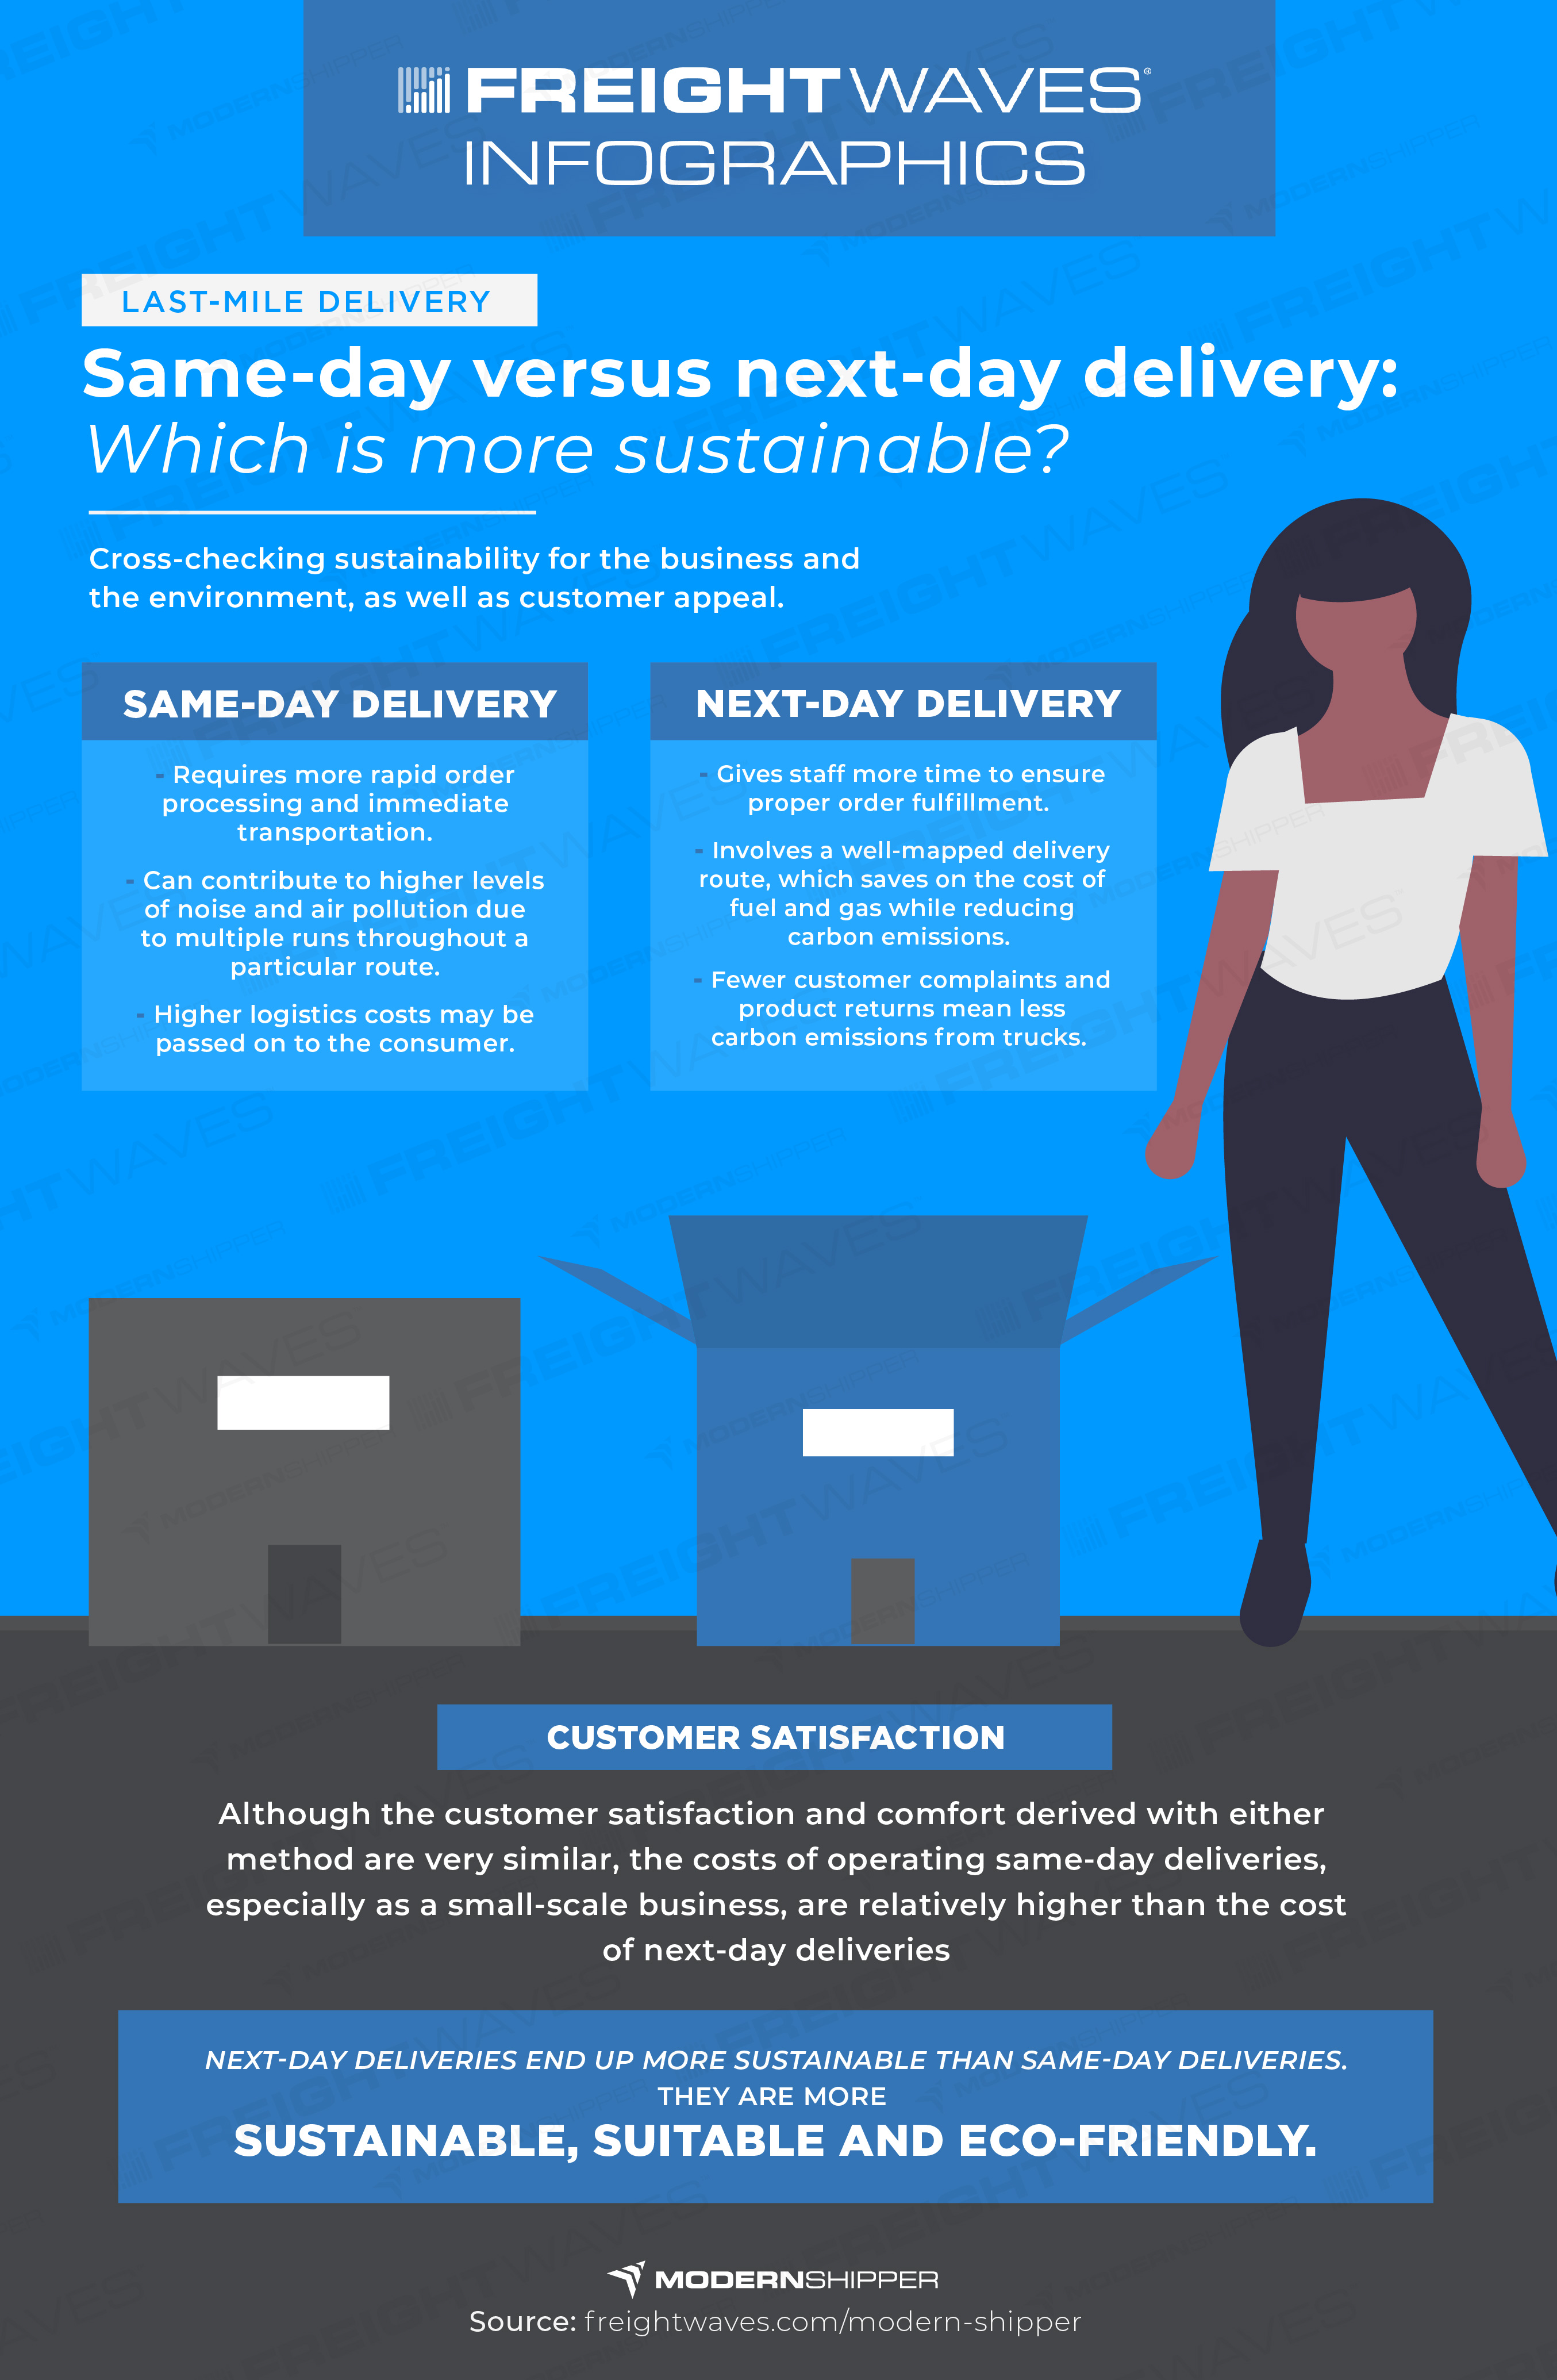 Same-day versus next-day delivery: Which is more sustainable